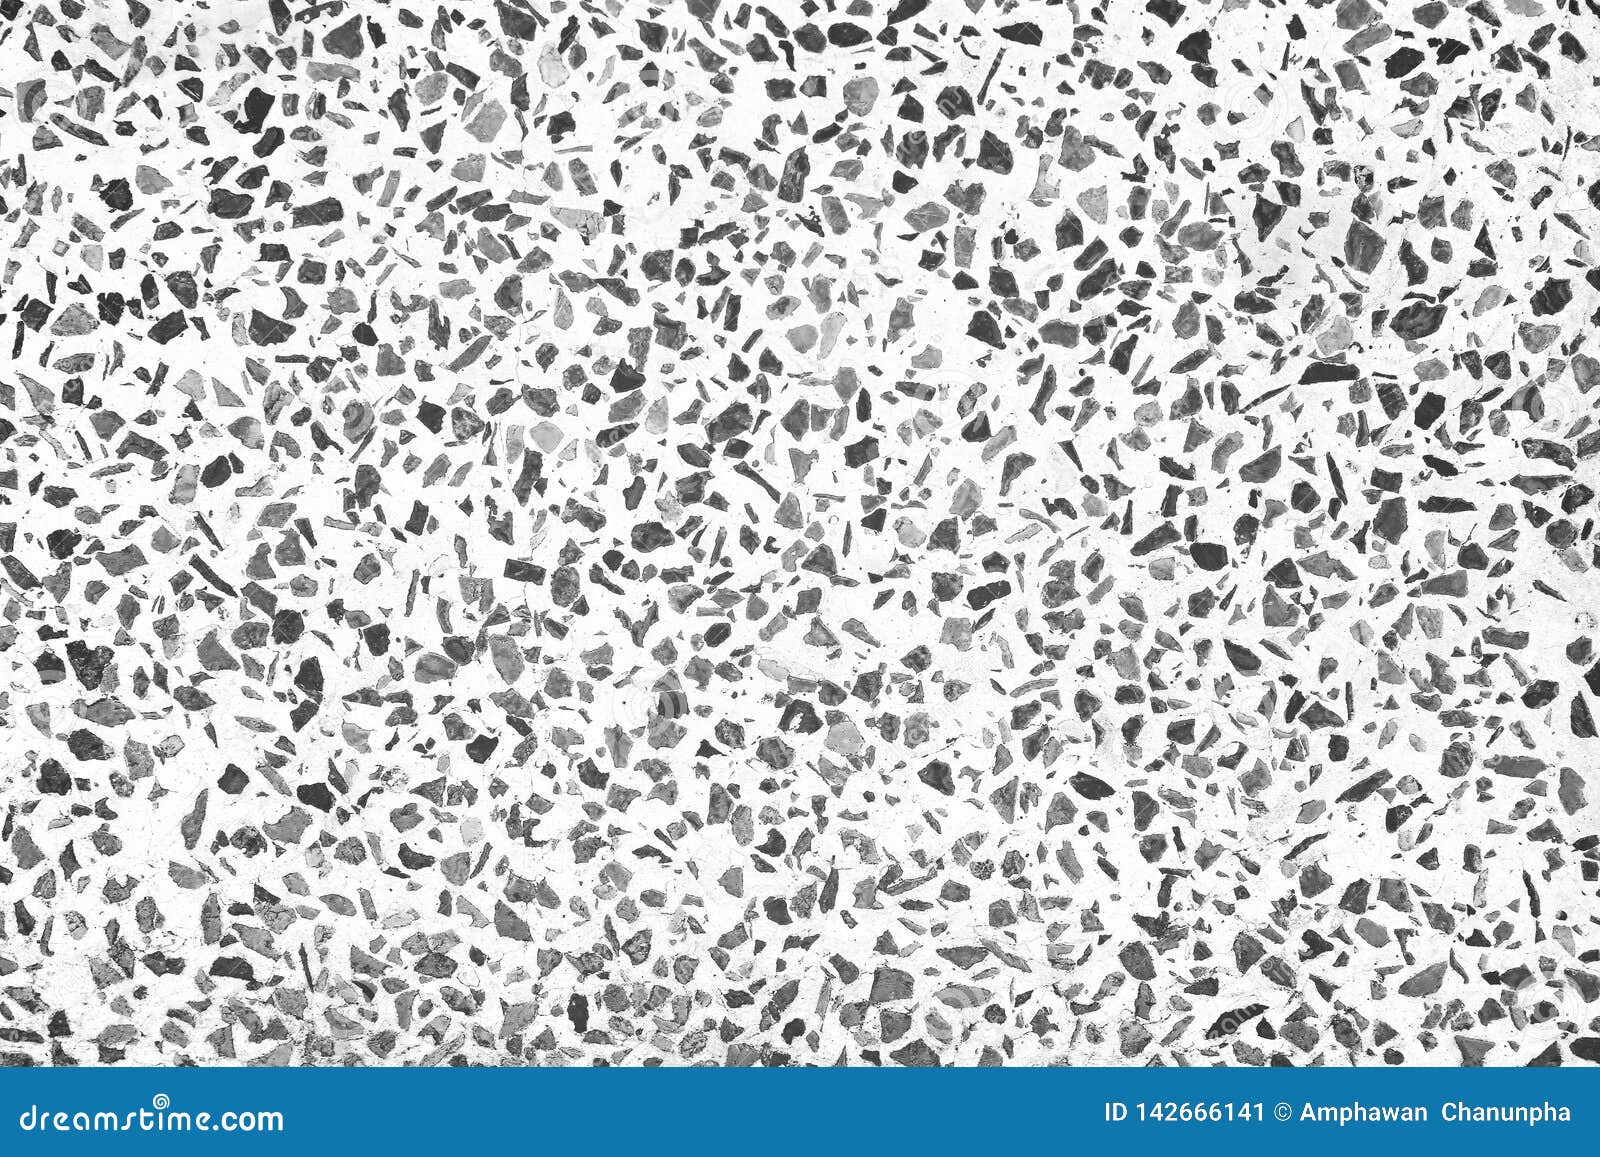 old terrazzo flooring in seamless patterns texture , black and white polished stone for background